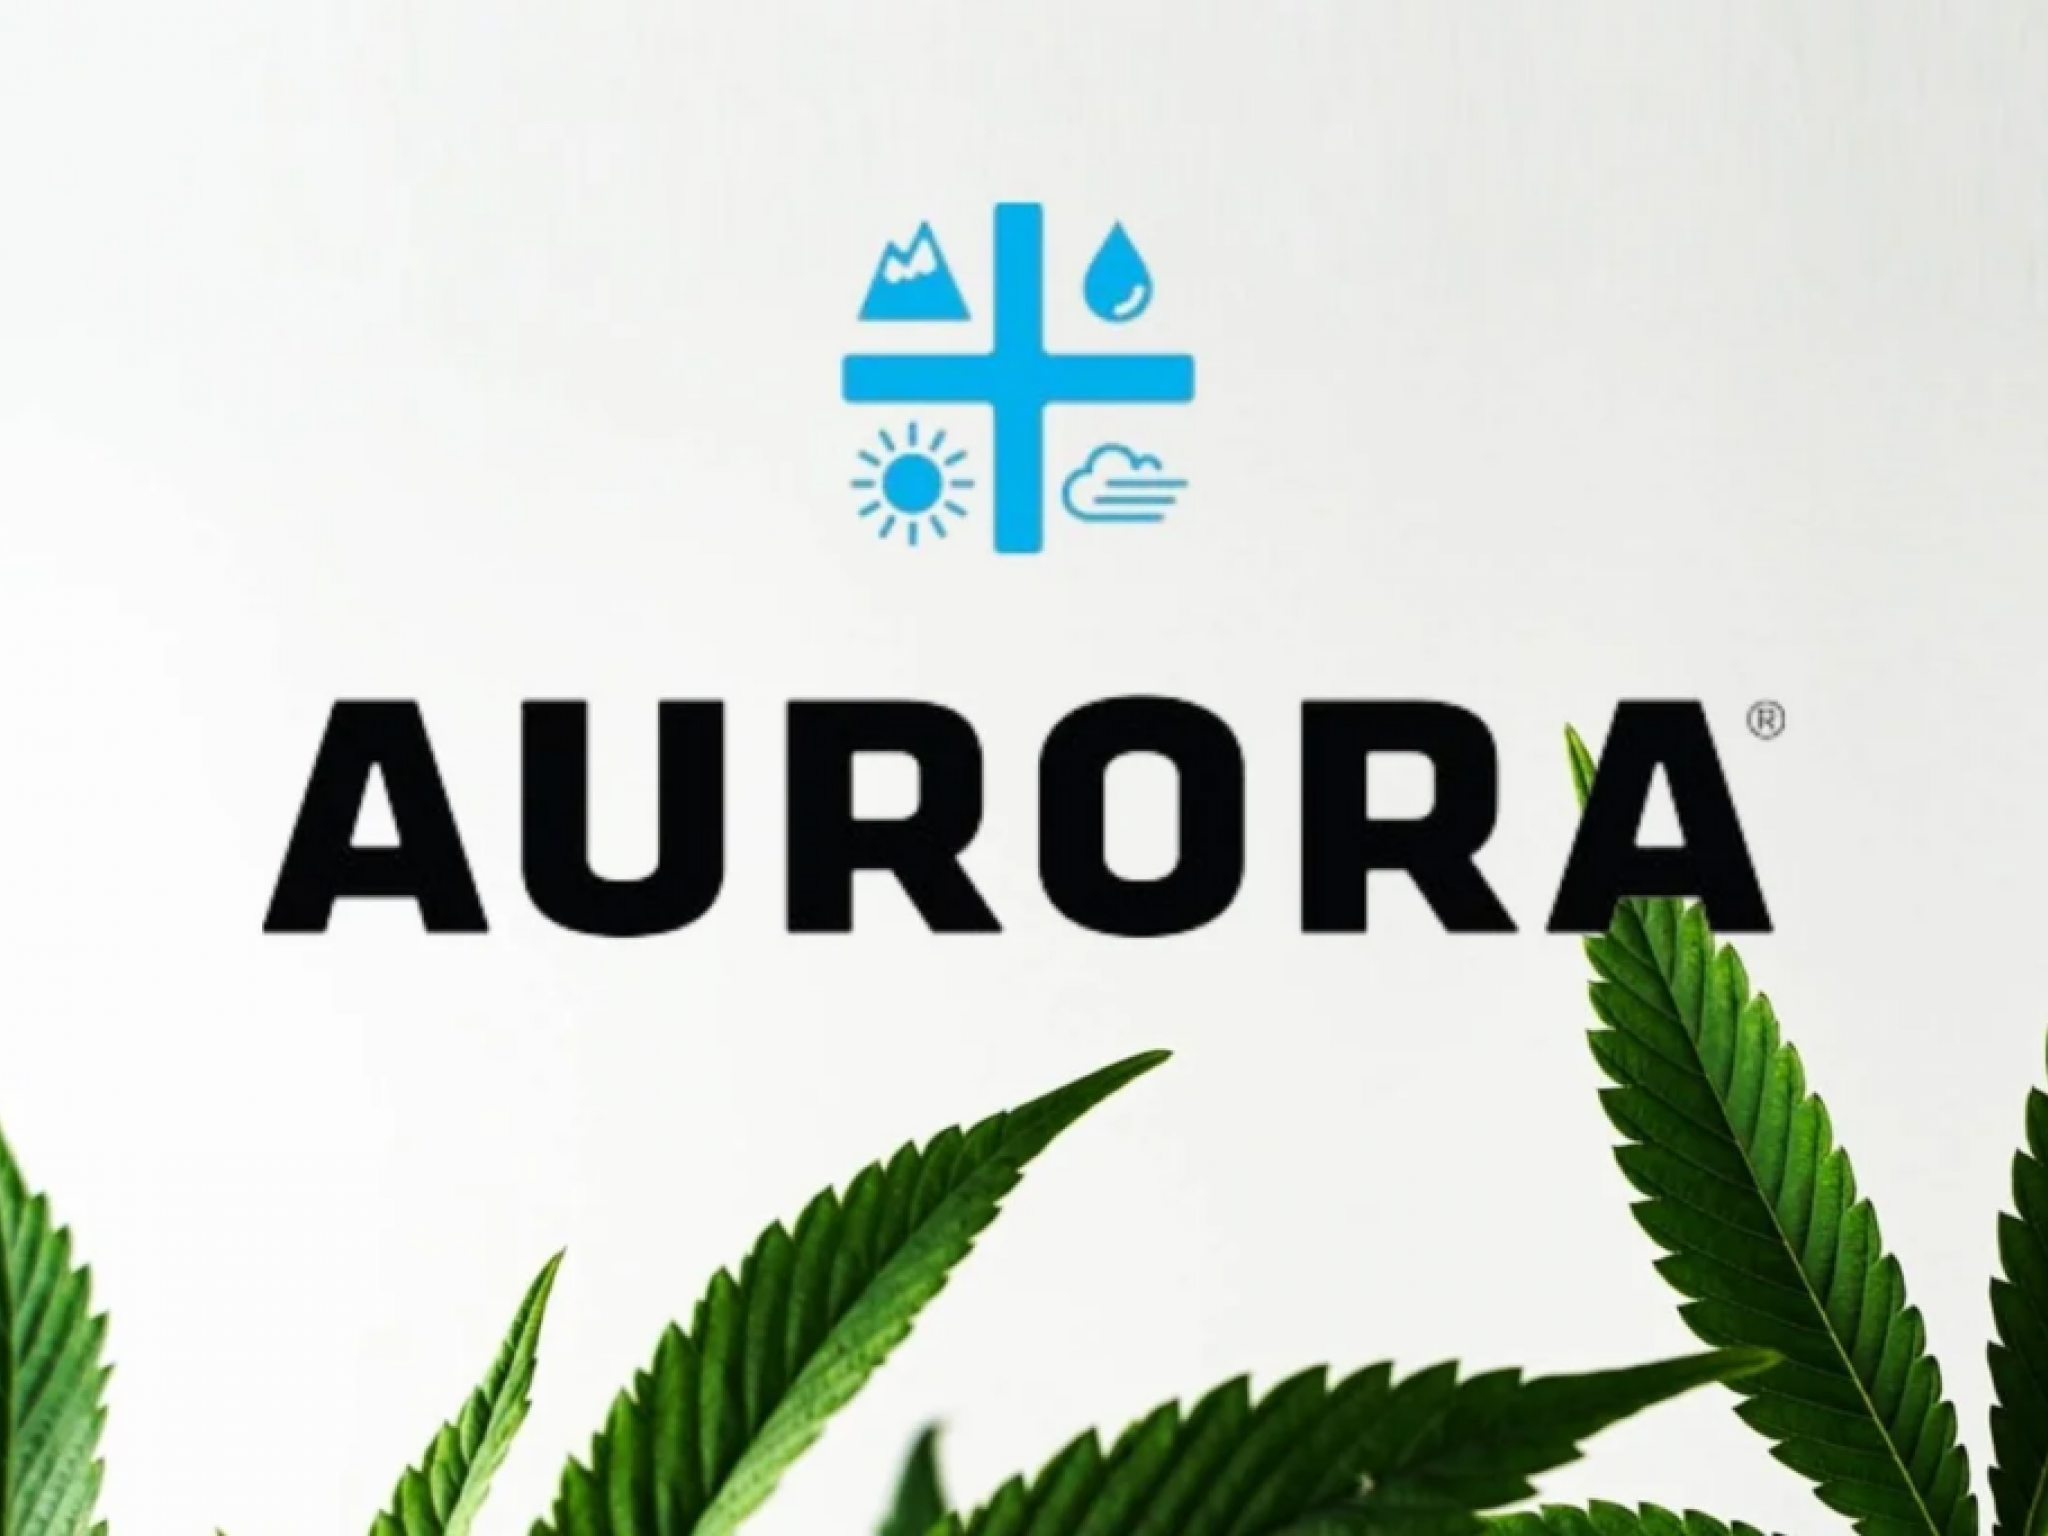  aurora-cannabis-medical-market-in-focus-golden-cross-suggests-stock-uptrend-ahead-of-q1-earnings 